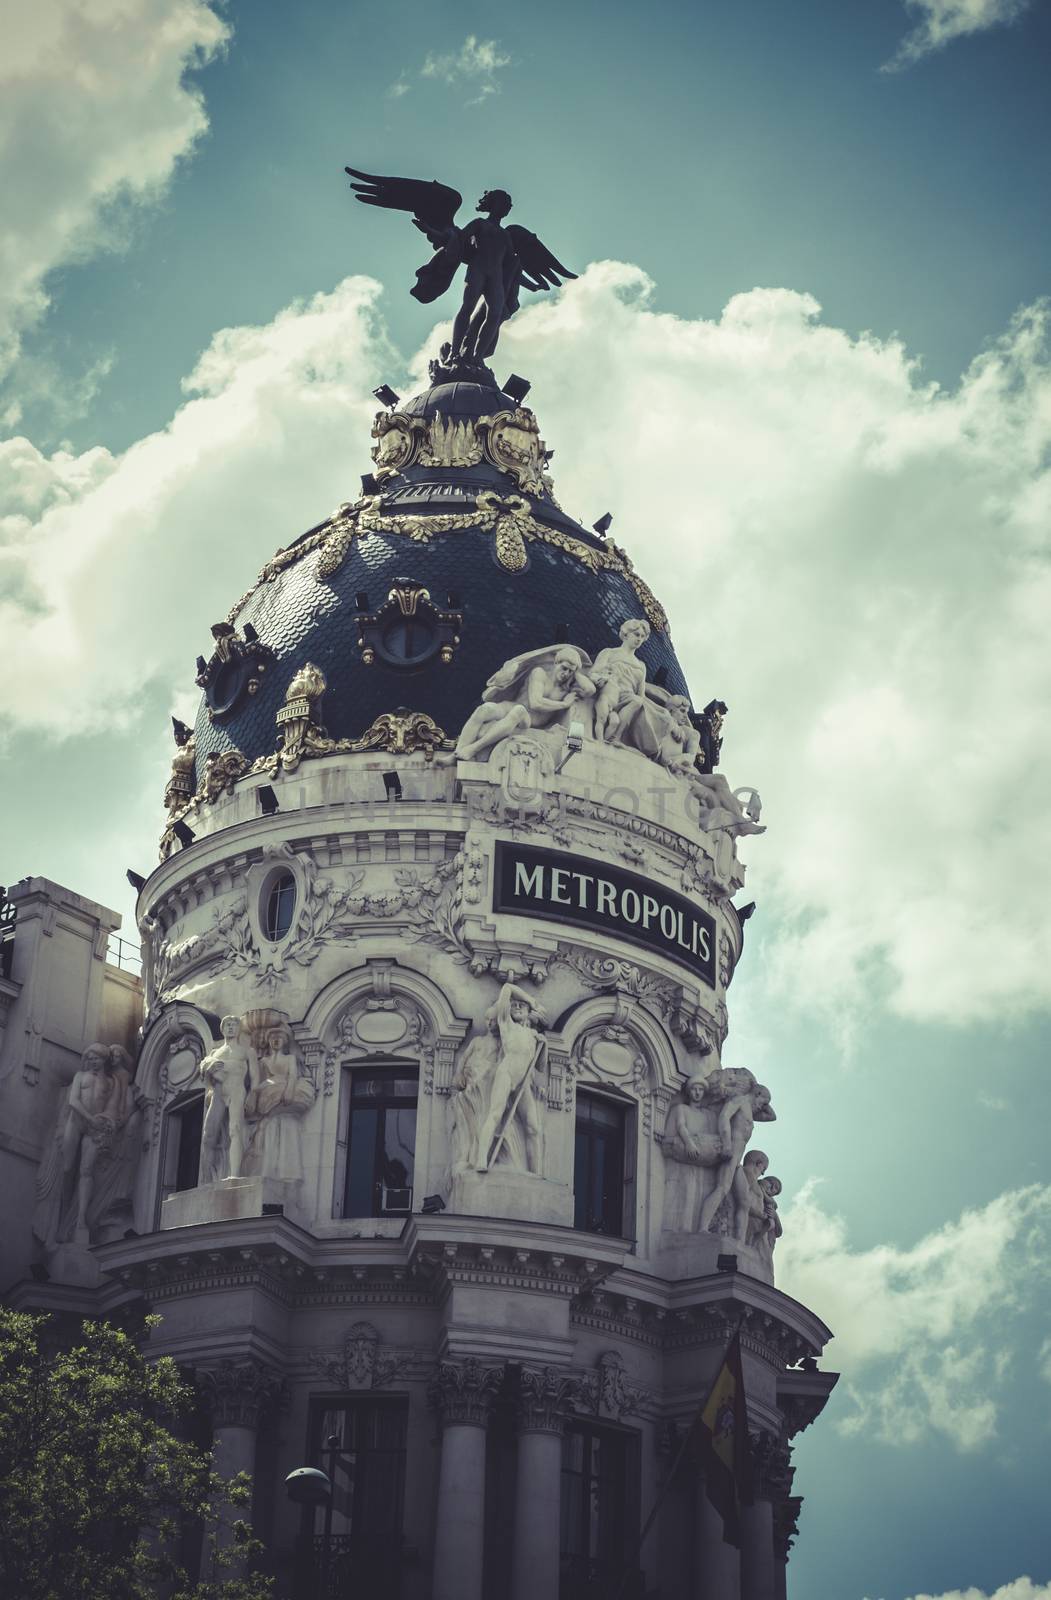 Metropolis, Image of the city of Madrid, its characteristic arch by FernandoCortes